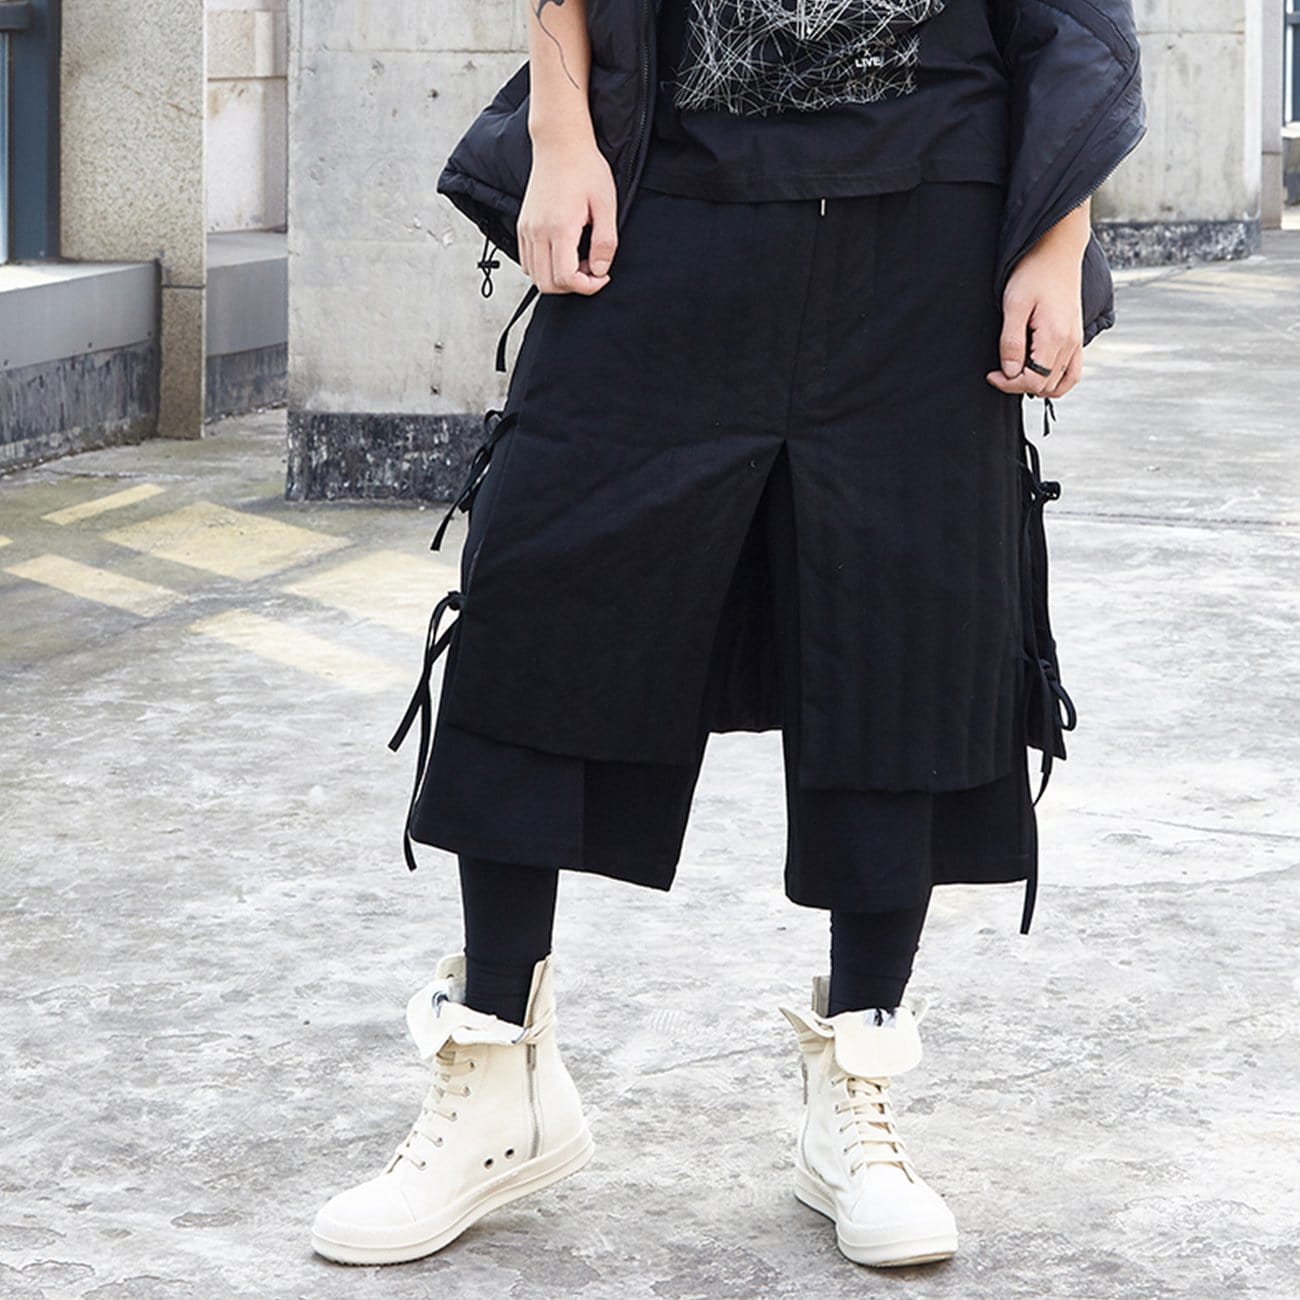 Dark Fake Two Bandage Oversized Thick Ankle-length Pants Streetwear Brand Techwear Combat Tactical YUGEN THEORY